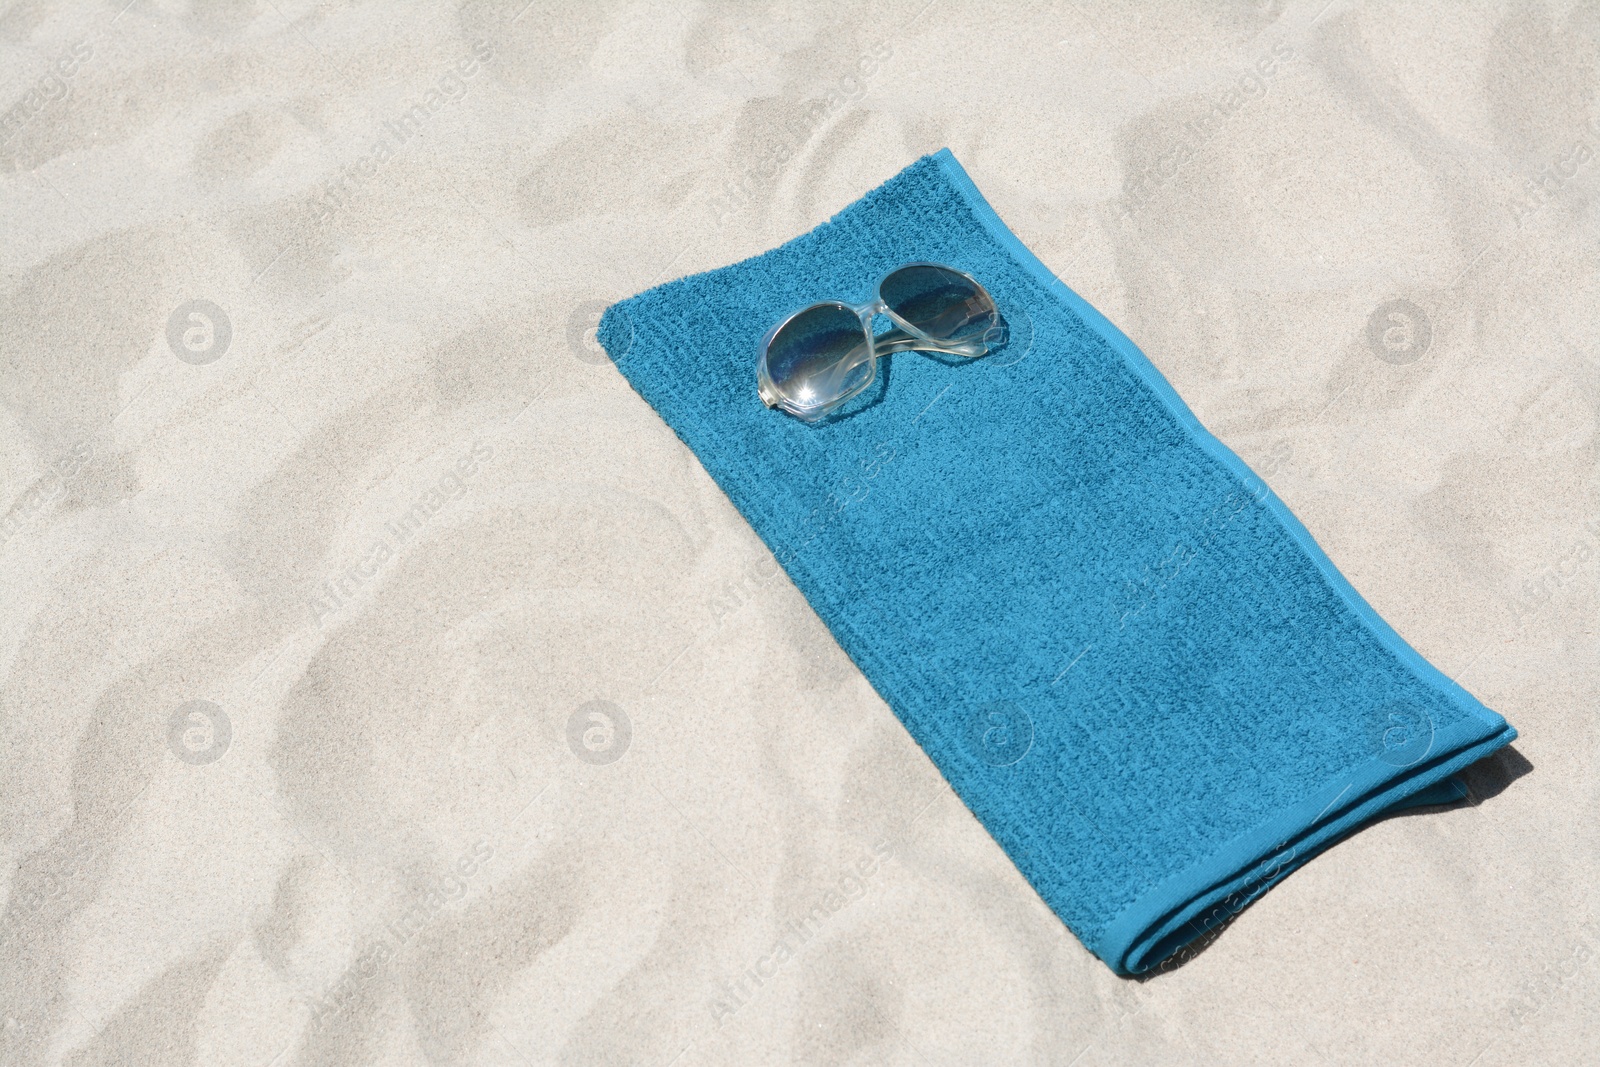 Photo of Soft blue towel and sunglasses on sandy beach, space for text